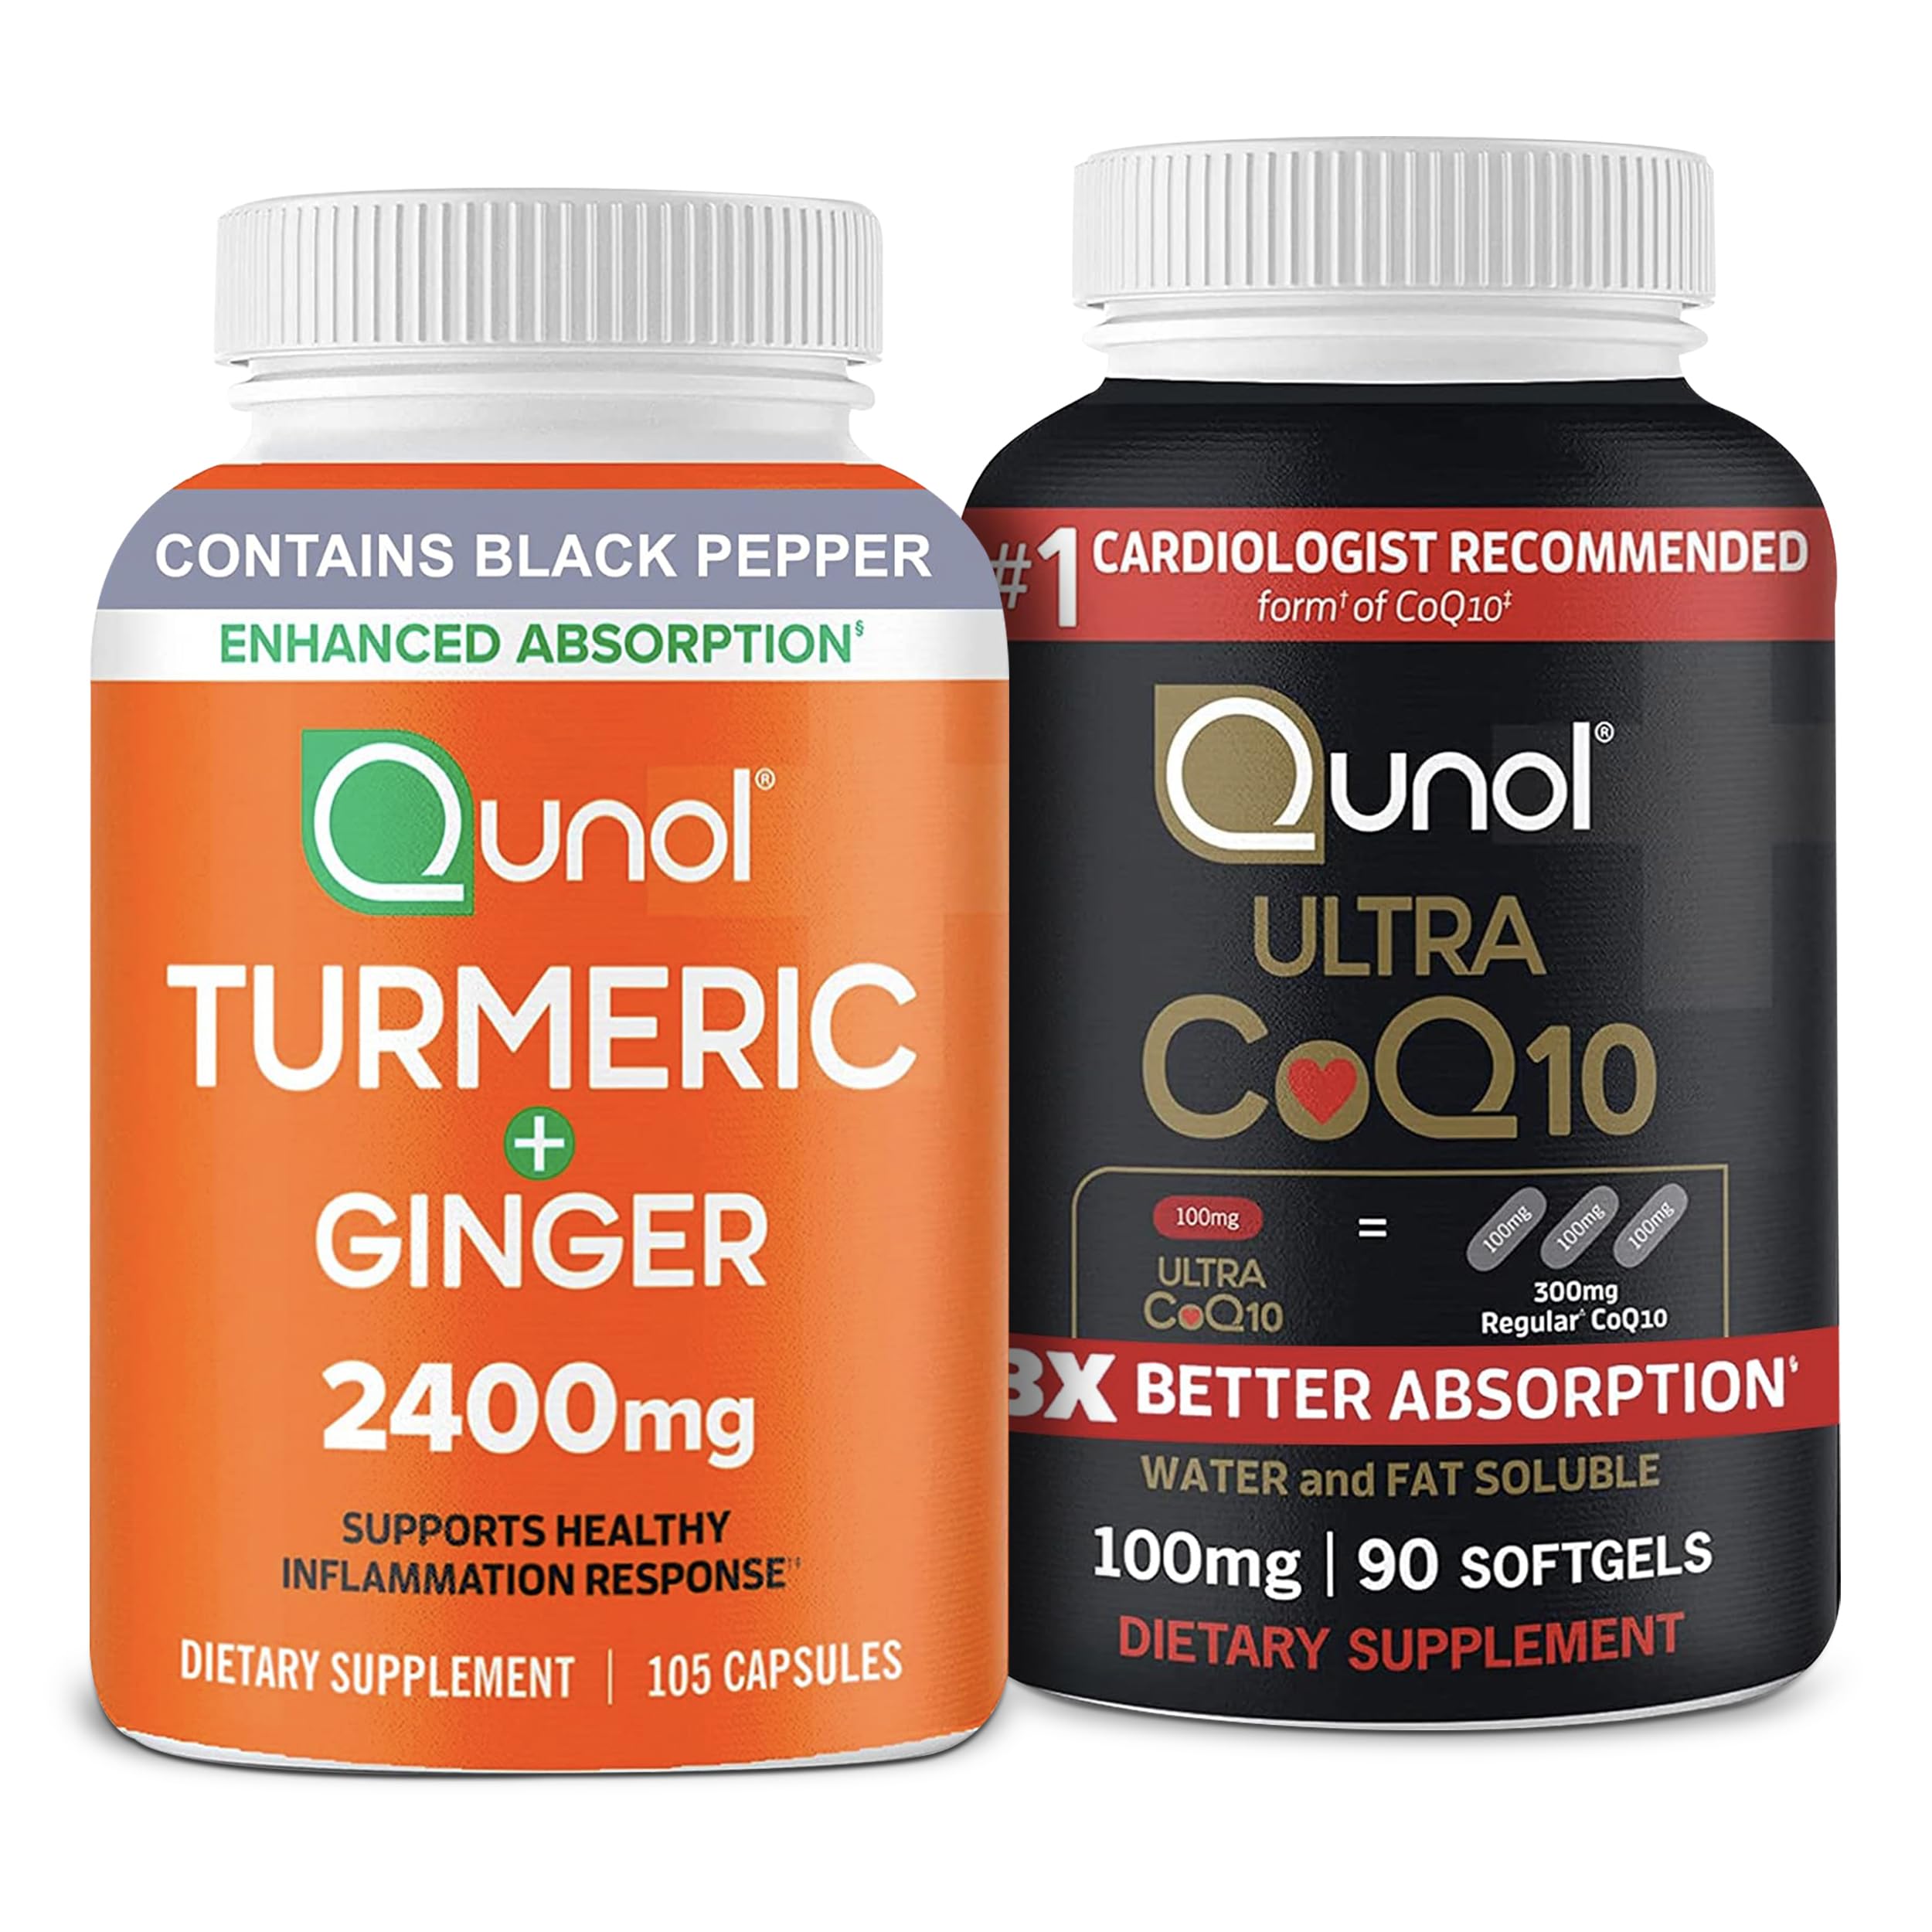 Qunol Turmeric Curcumin with Black Pepper & Ginger 2400mg, 105 Count + CoQ10 100mg Softgels, Ultra CoQ10 100mg, 3X Better Absorption, 3 Month Supply, 90 Count